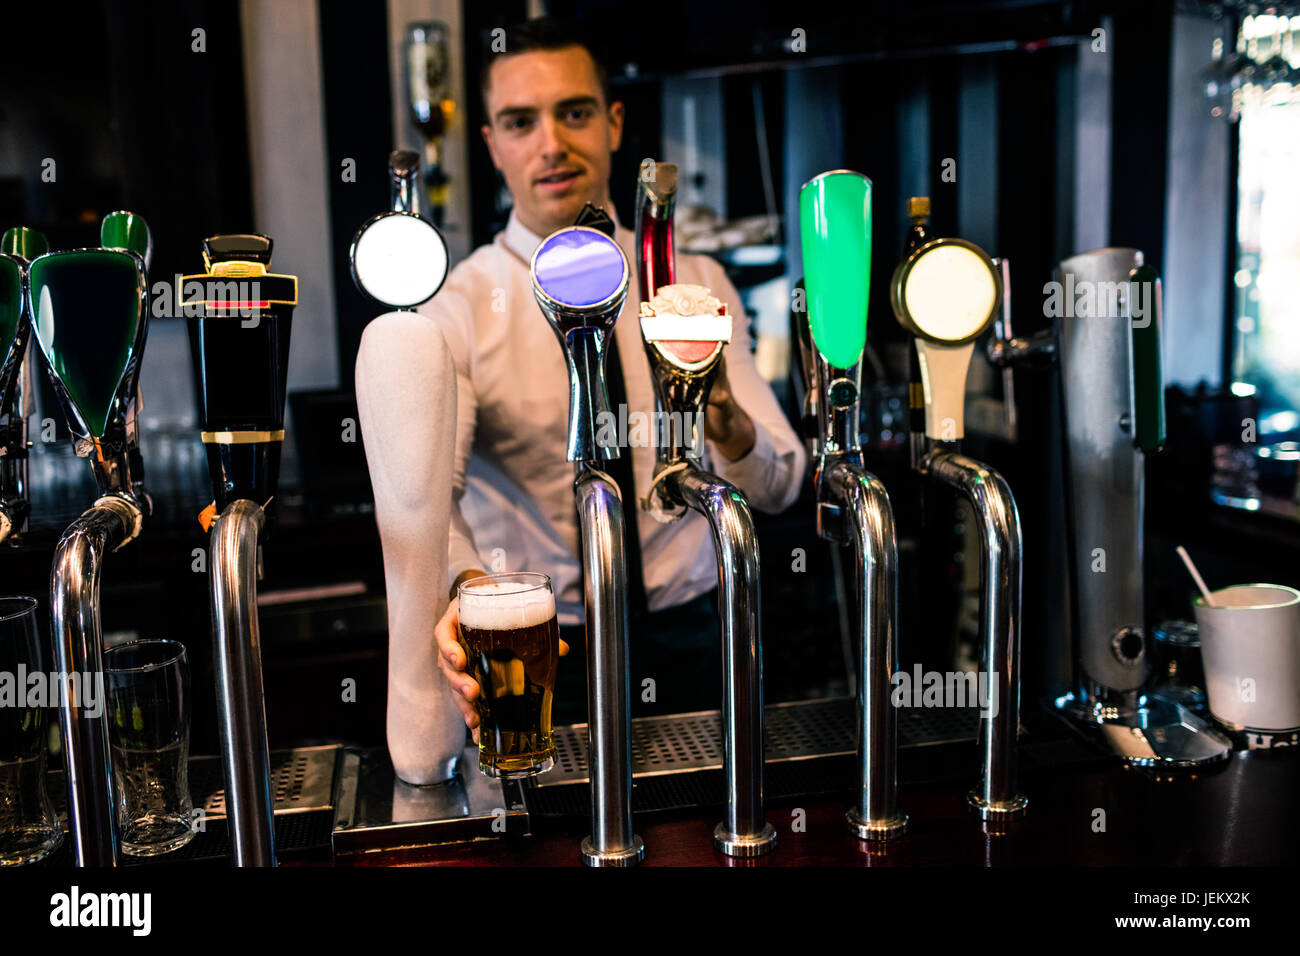 Barman serving a pint of beer Stock Photo